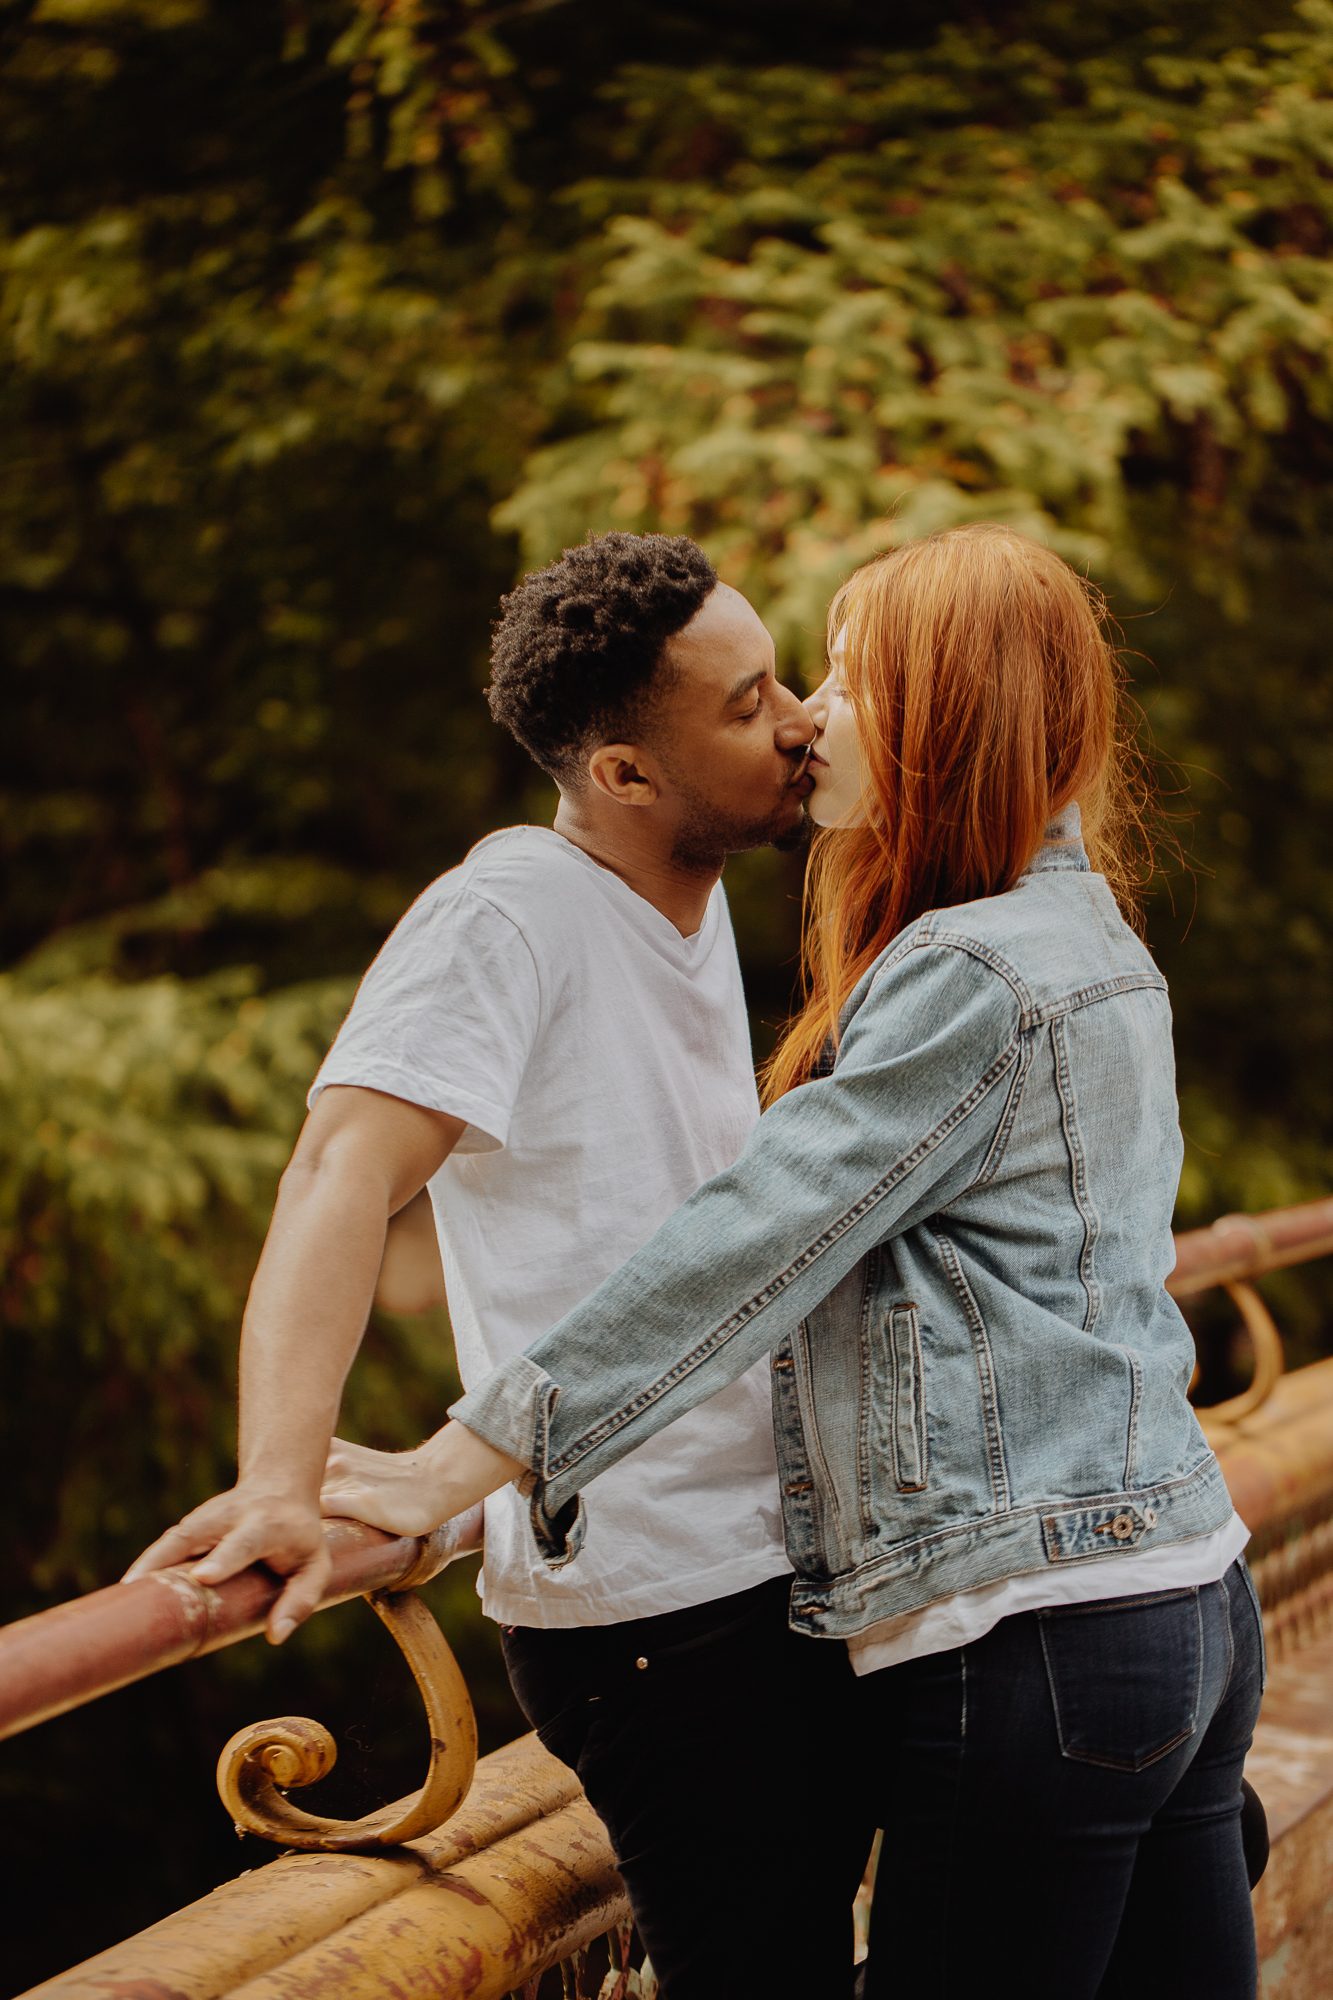 Flawless Prospect Park Engagement Photography